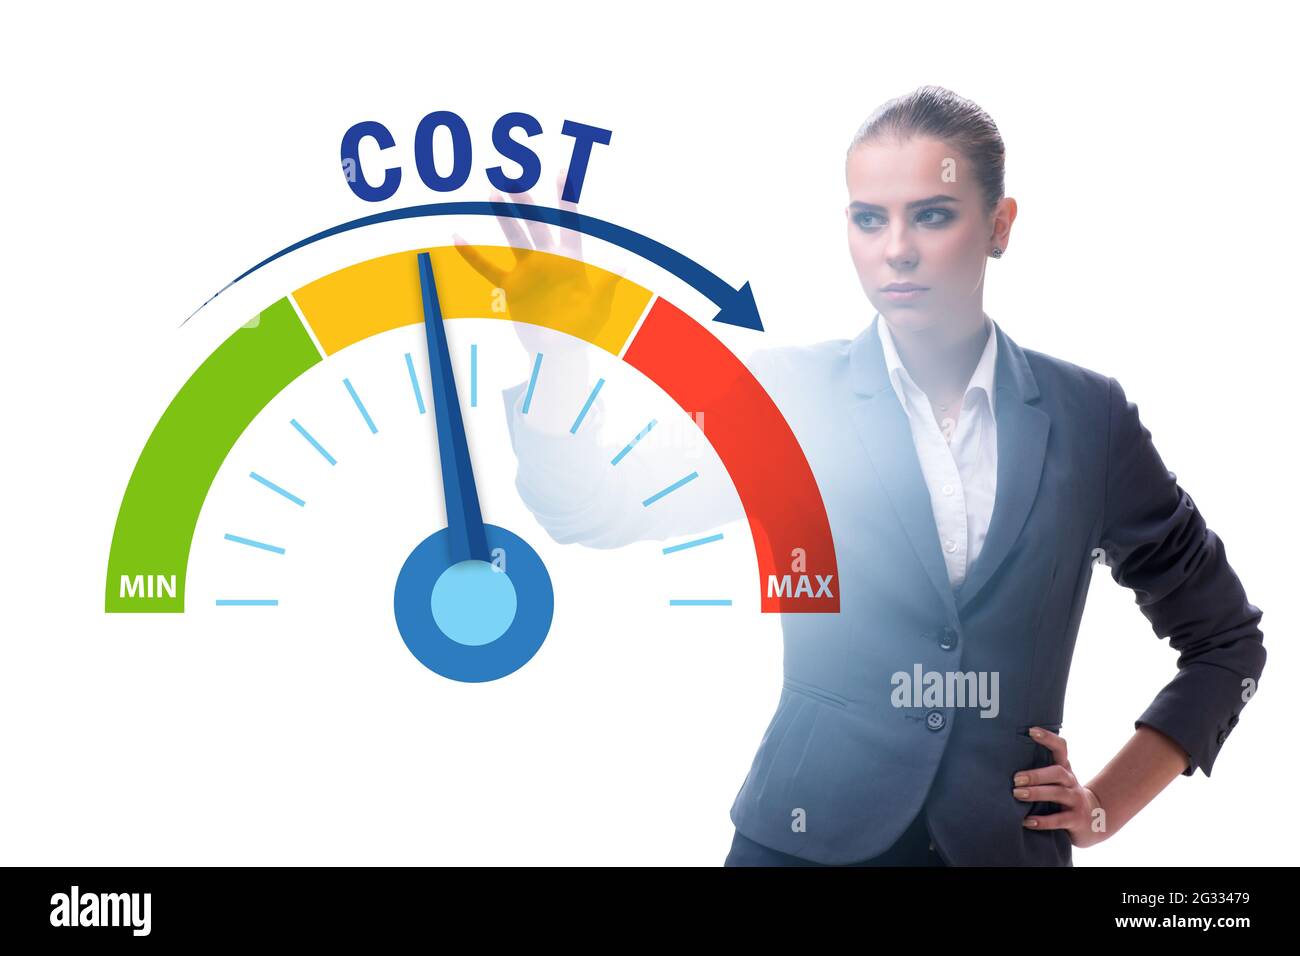 Businesswoman in the cost management concept Stock Photo